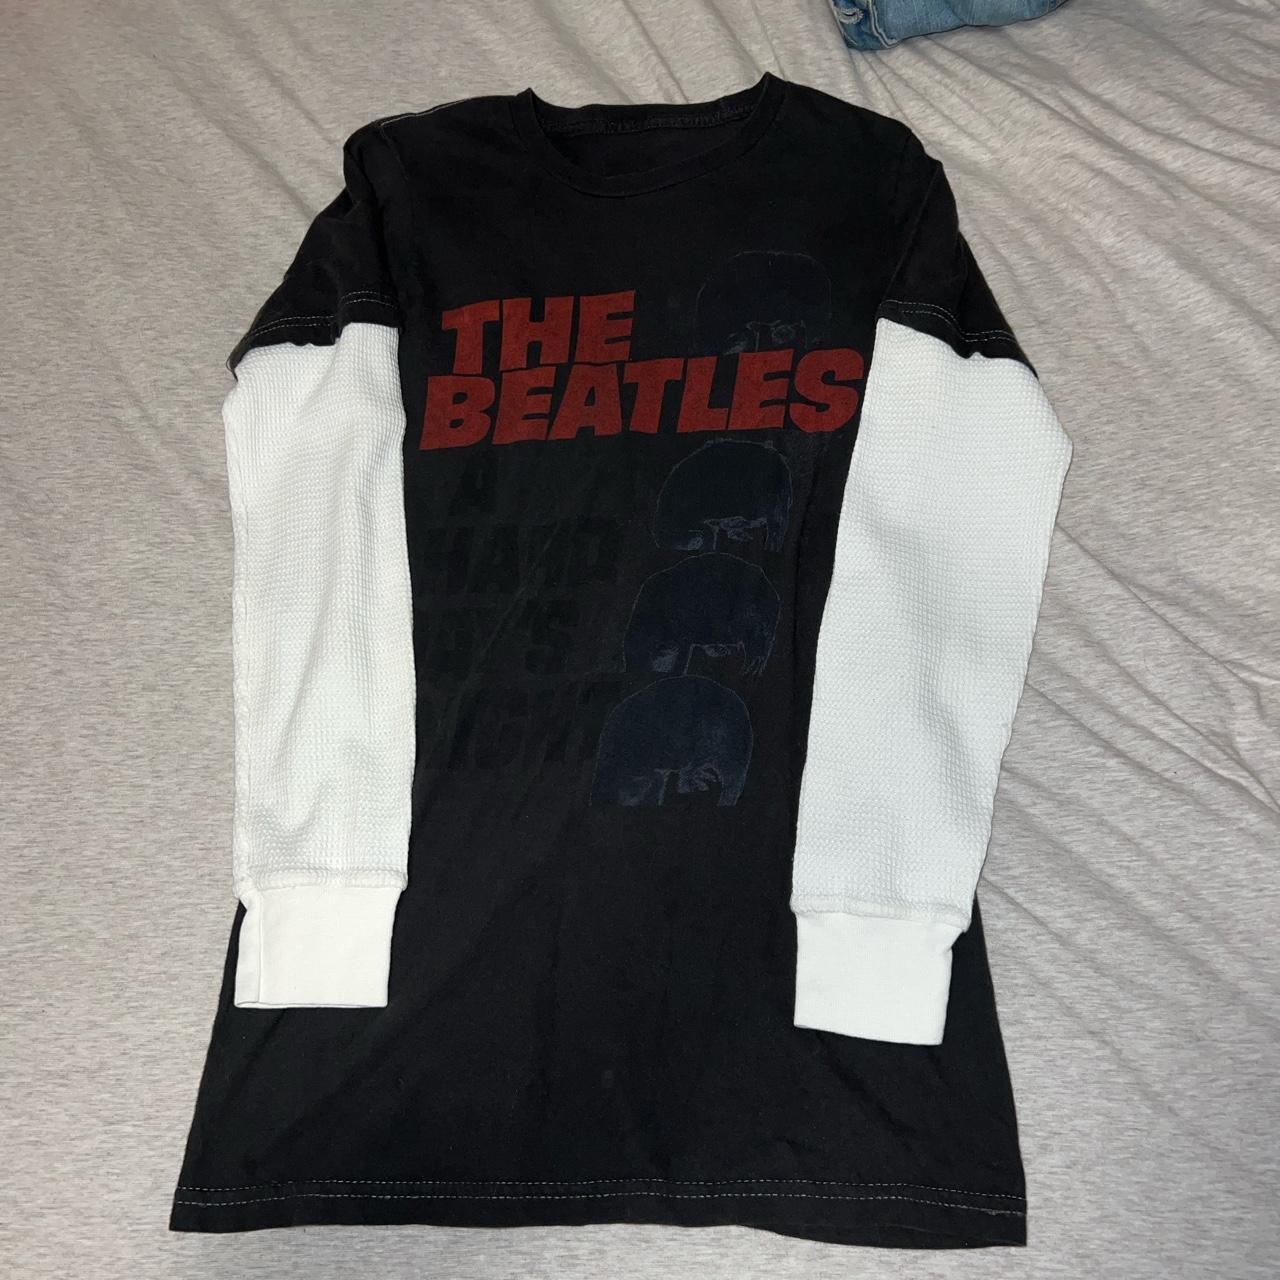 NWOT Out From Under from Urban Outfitters black - Depop